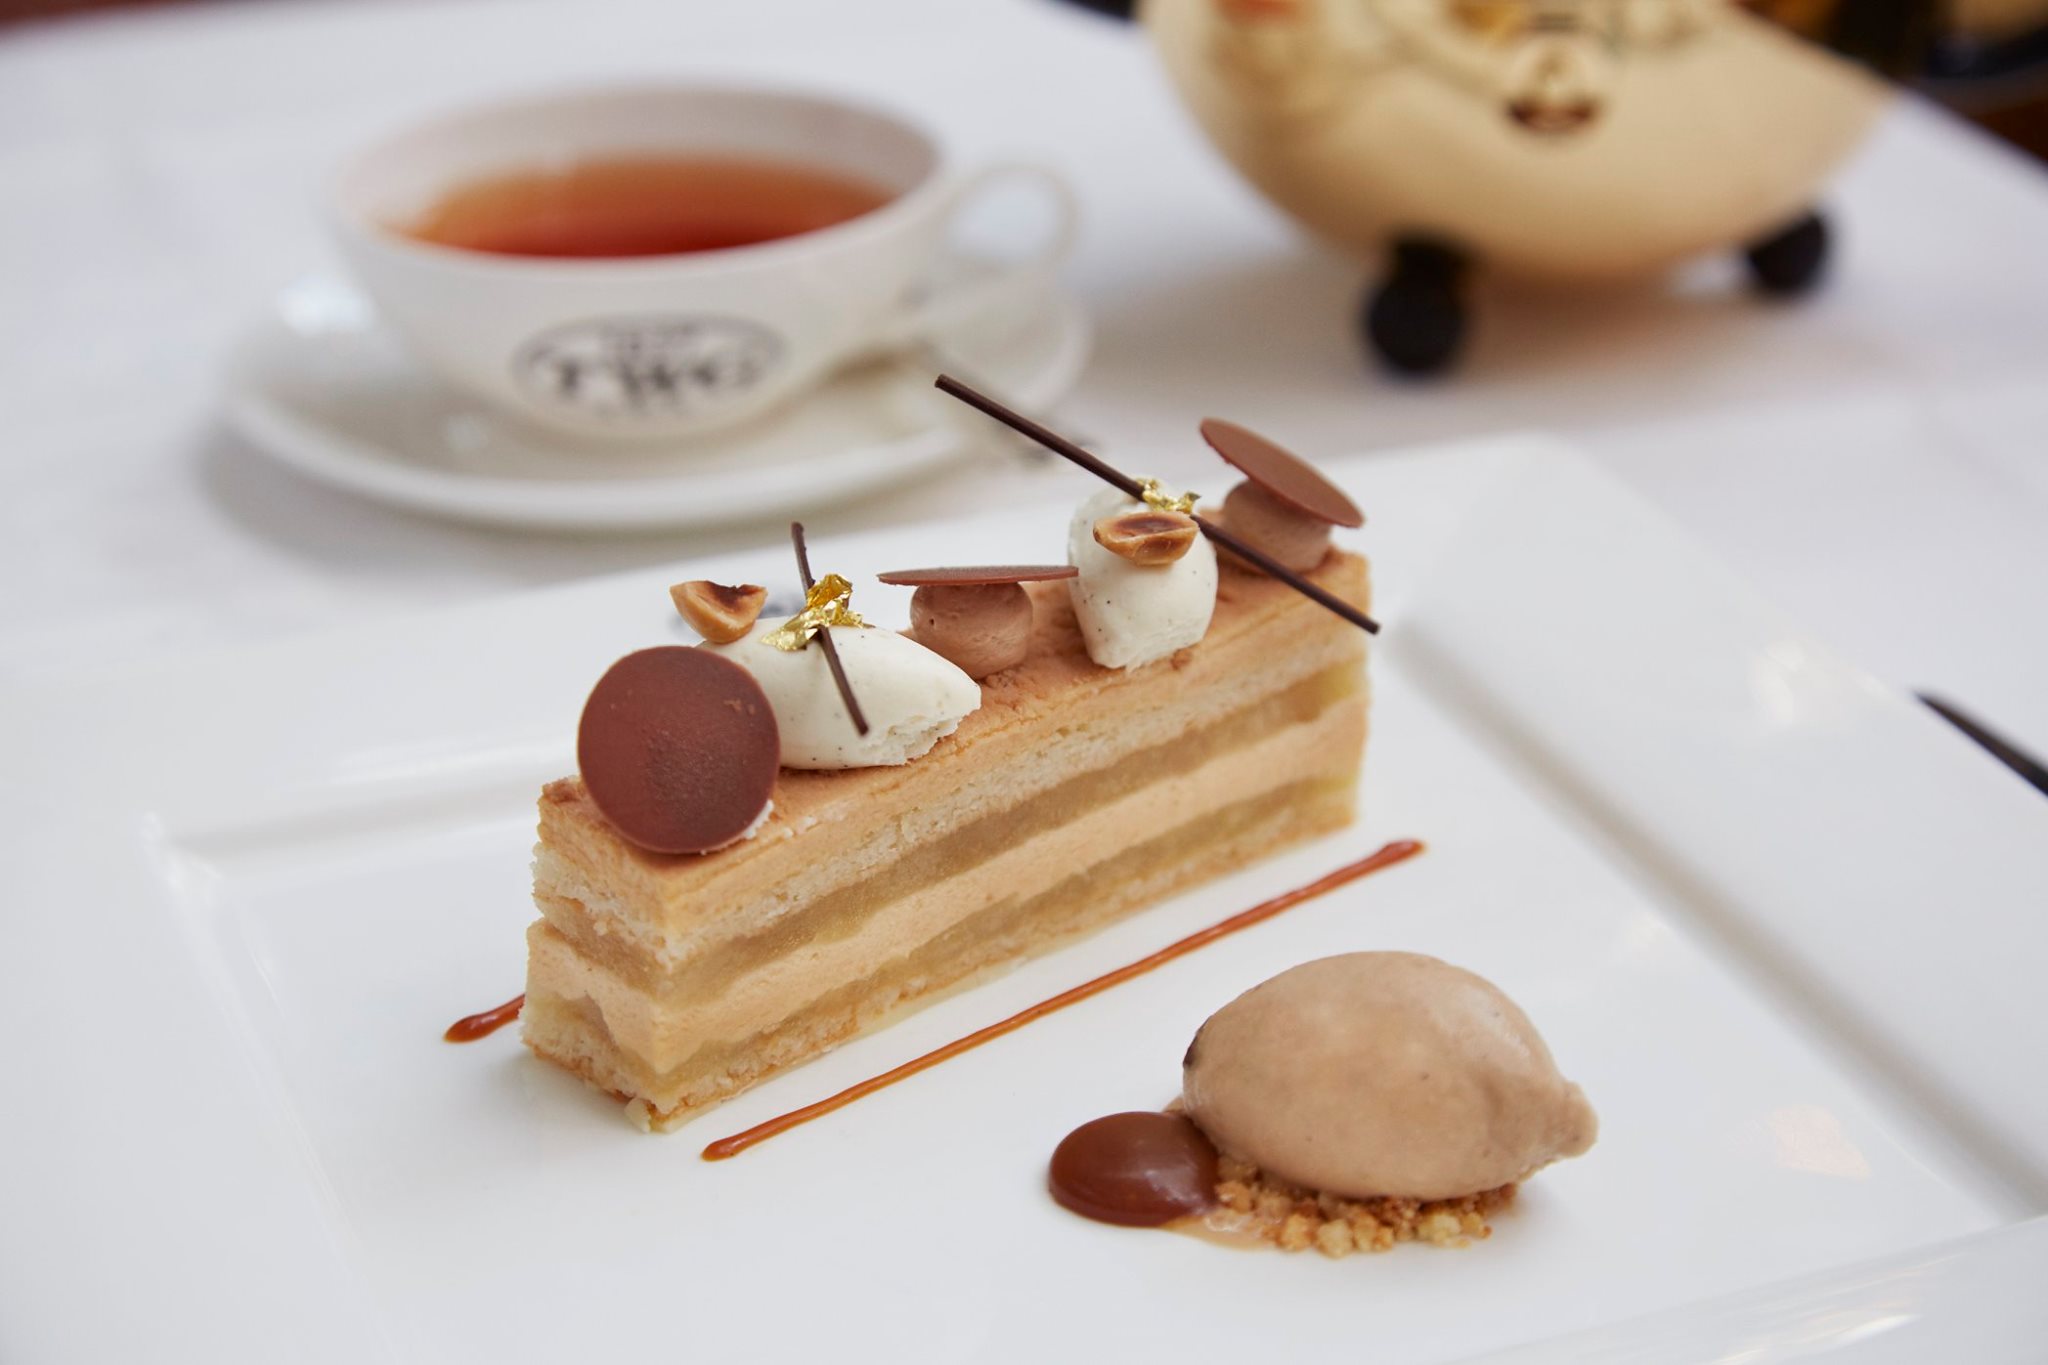 Apple caramel mousse cake with roasted hazelnuts topped with Jivara chocolate mousse and vanilla Chantilly cream served with caramel sauce and a scoop of Napoleon Tea ice cream on this week's set menu. Available at all TWG Tea Salons in Singapore.